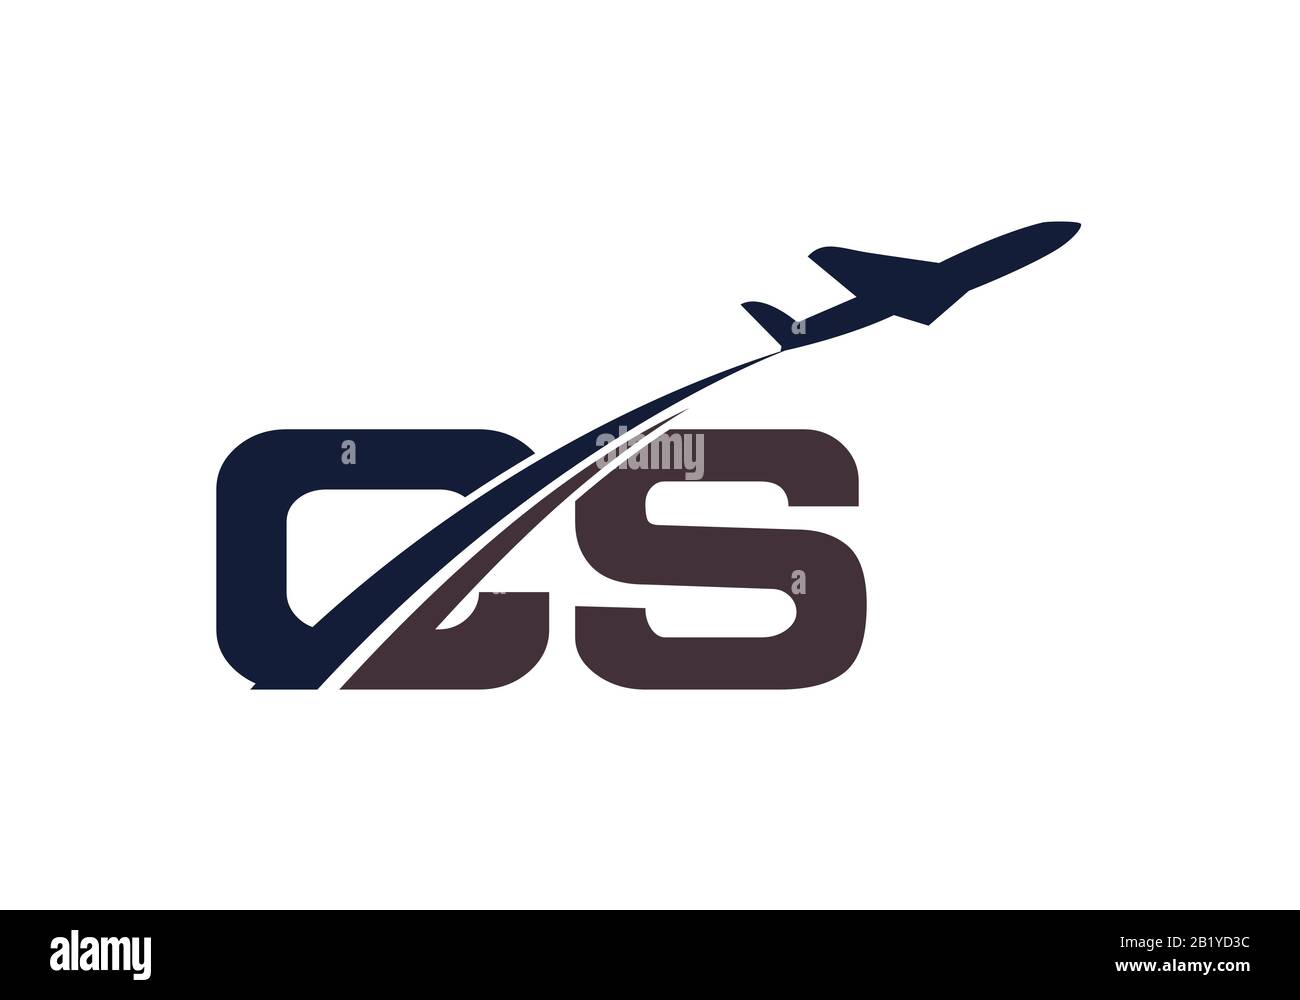 Initial Letter C and S  with Aviation Logo Design, Air, Airline, Airplane and Travel Logo template. Stock Vector